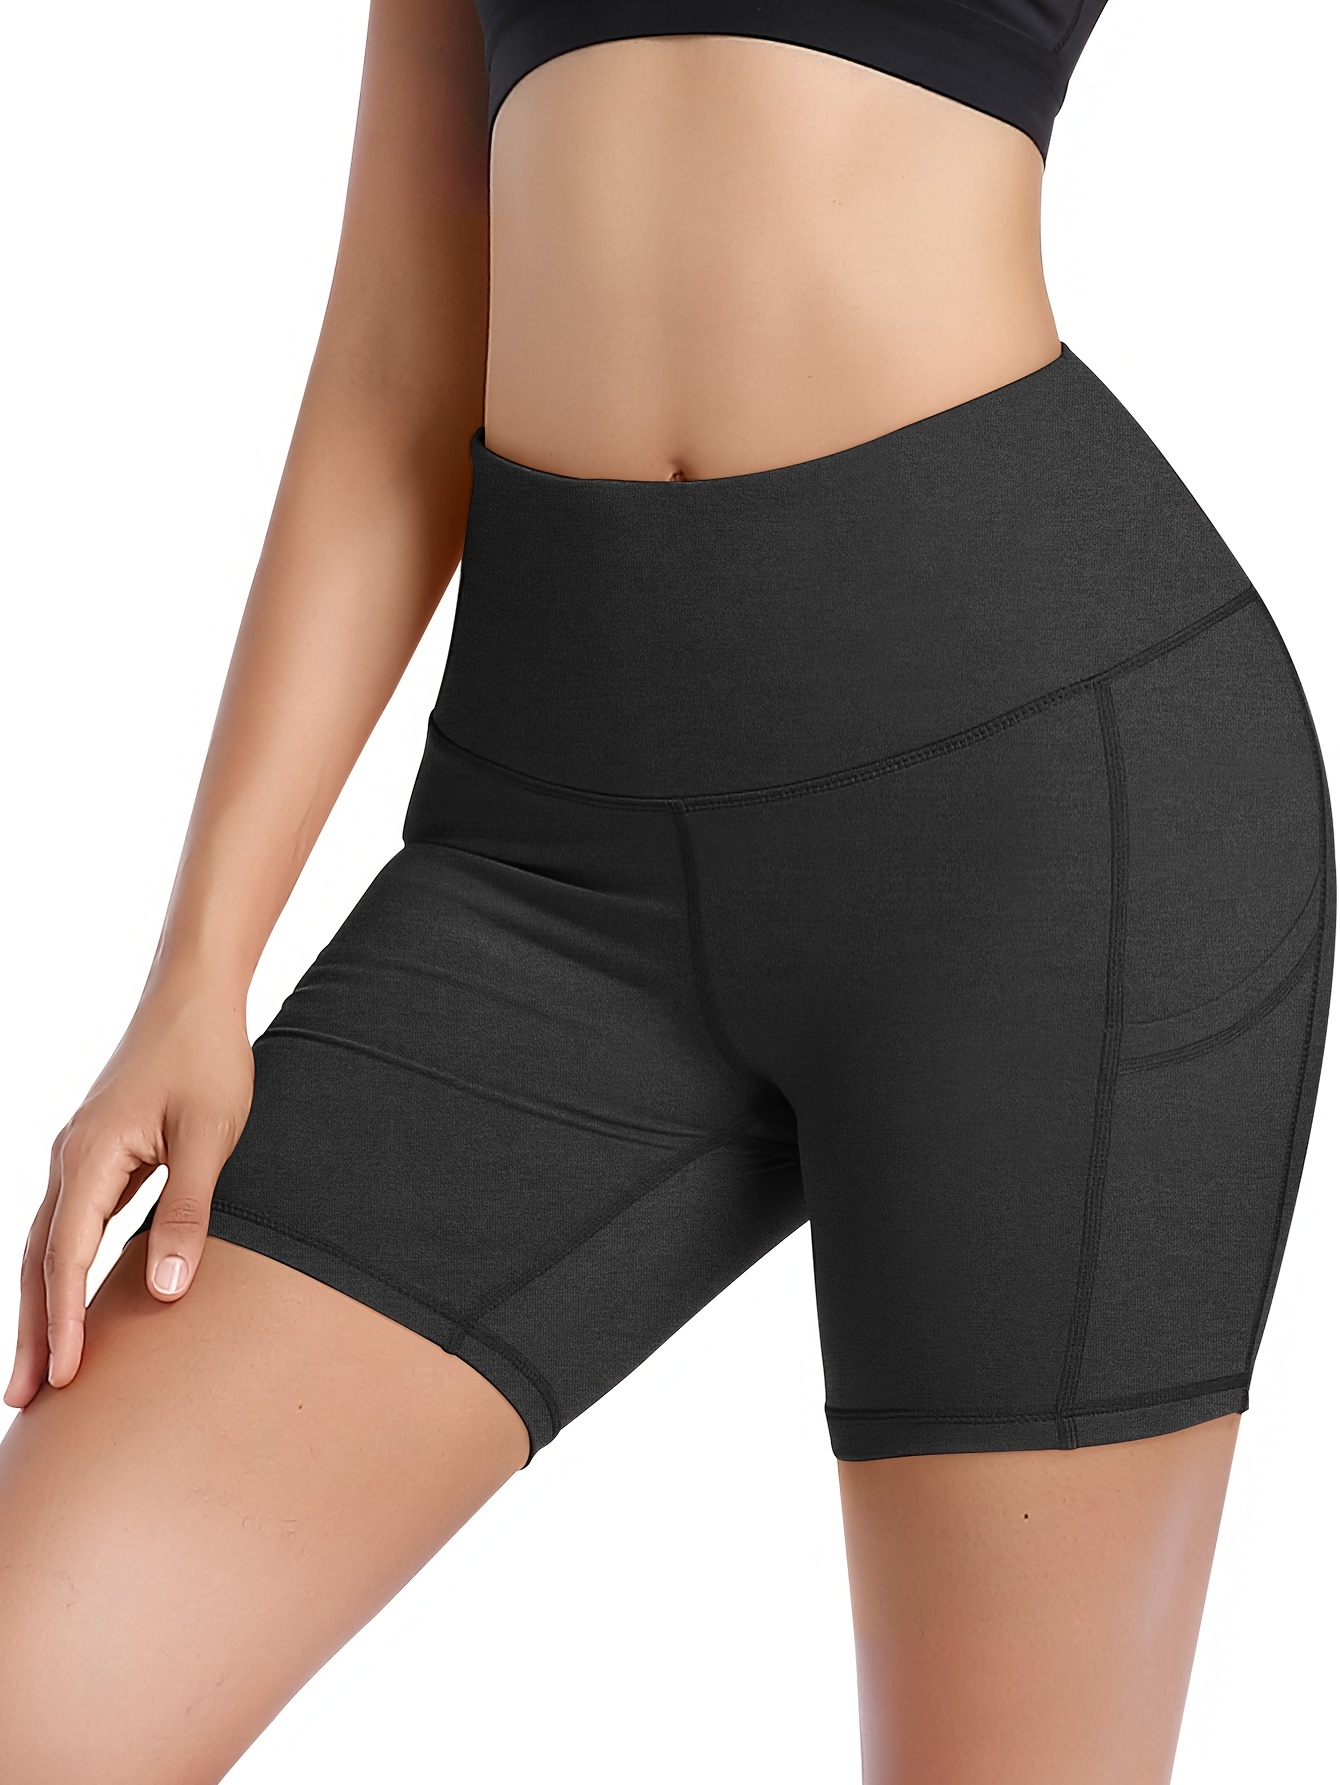 athletic compression biker shorts and running